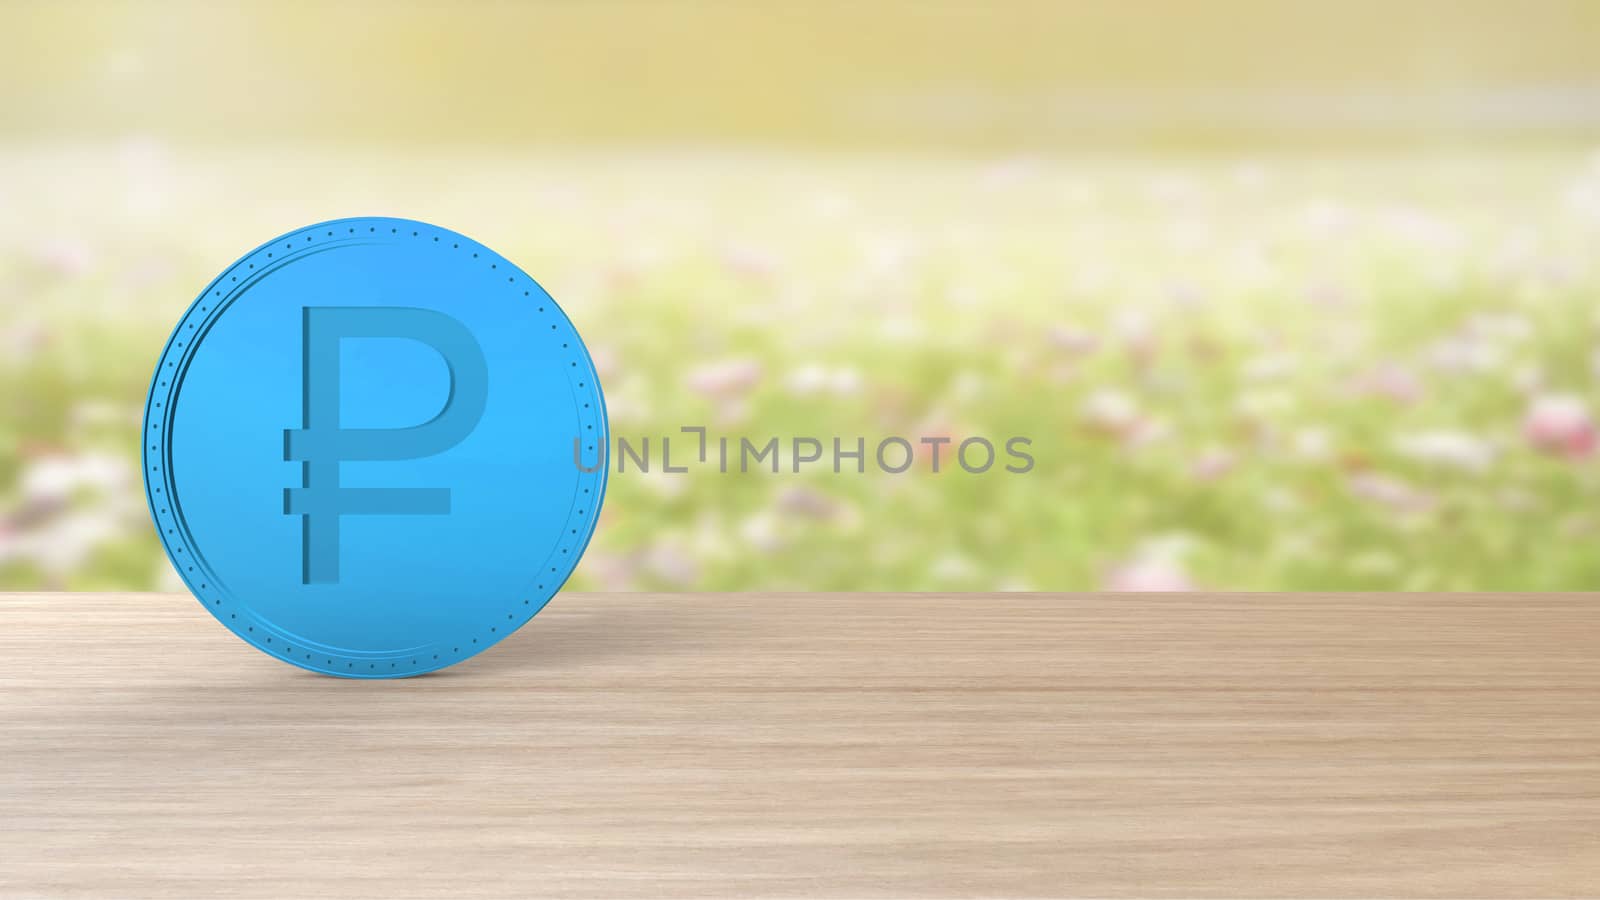 Blue ruble coin Isolated on blur field of flowers background. 3d render isolated illustration, business, management, risk, money, cash, growth, banking, bank, finance, symbol. by Andreajk3